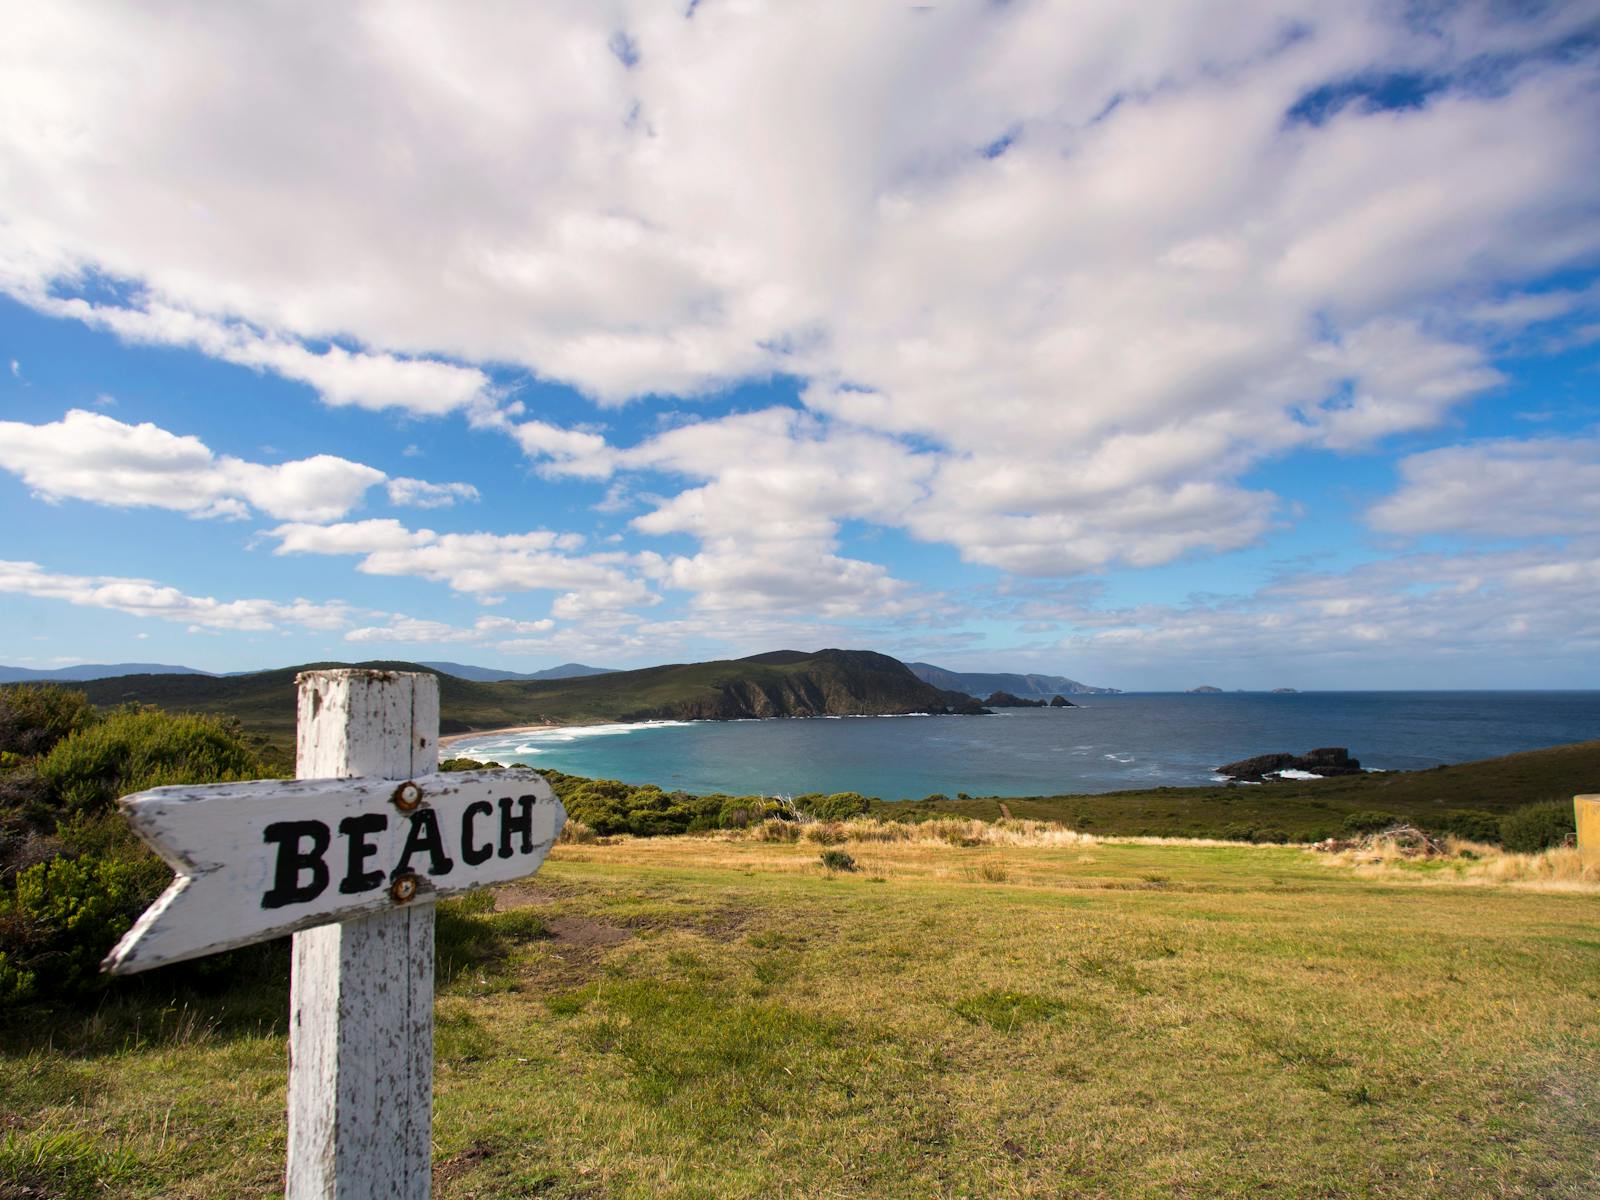 Get off the beaten track when you visit Bruny Island with Adventure Trails Tasmania